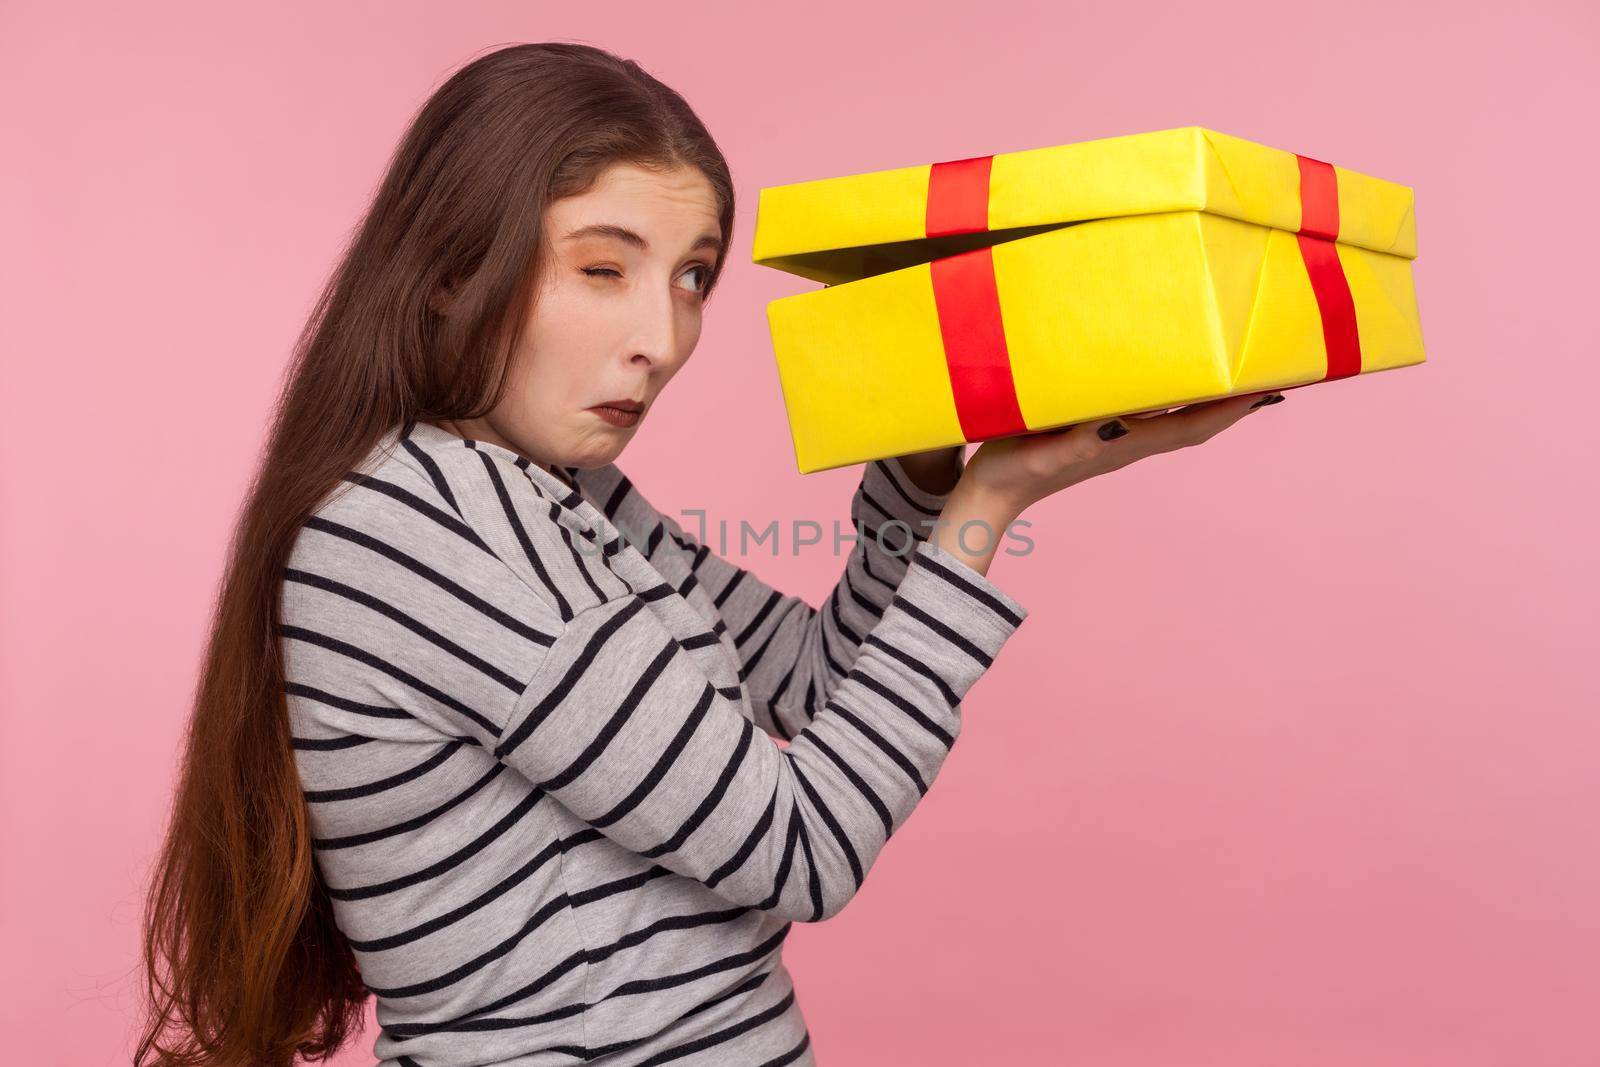 Portrait of funny curious nosy woman in striped sweatshirt peeking into gift box, impatient to unpack birthday present, looking inside with inquisitive expression. indoor studio shot, pink background